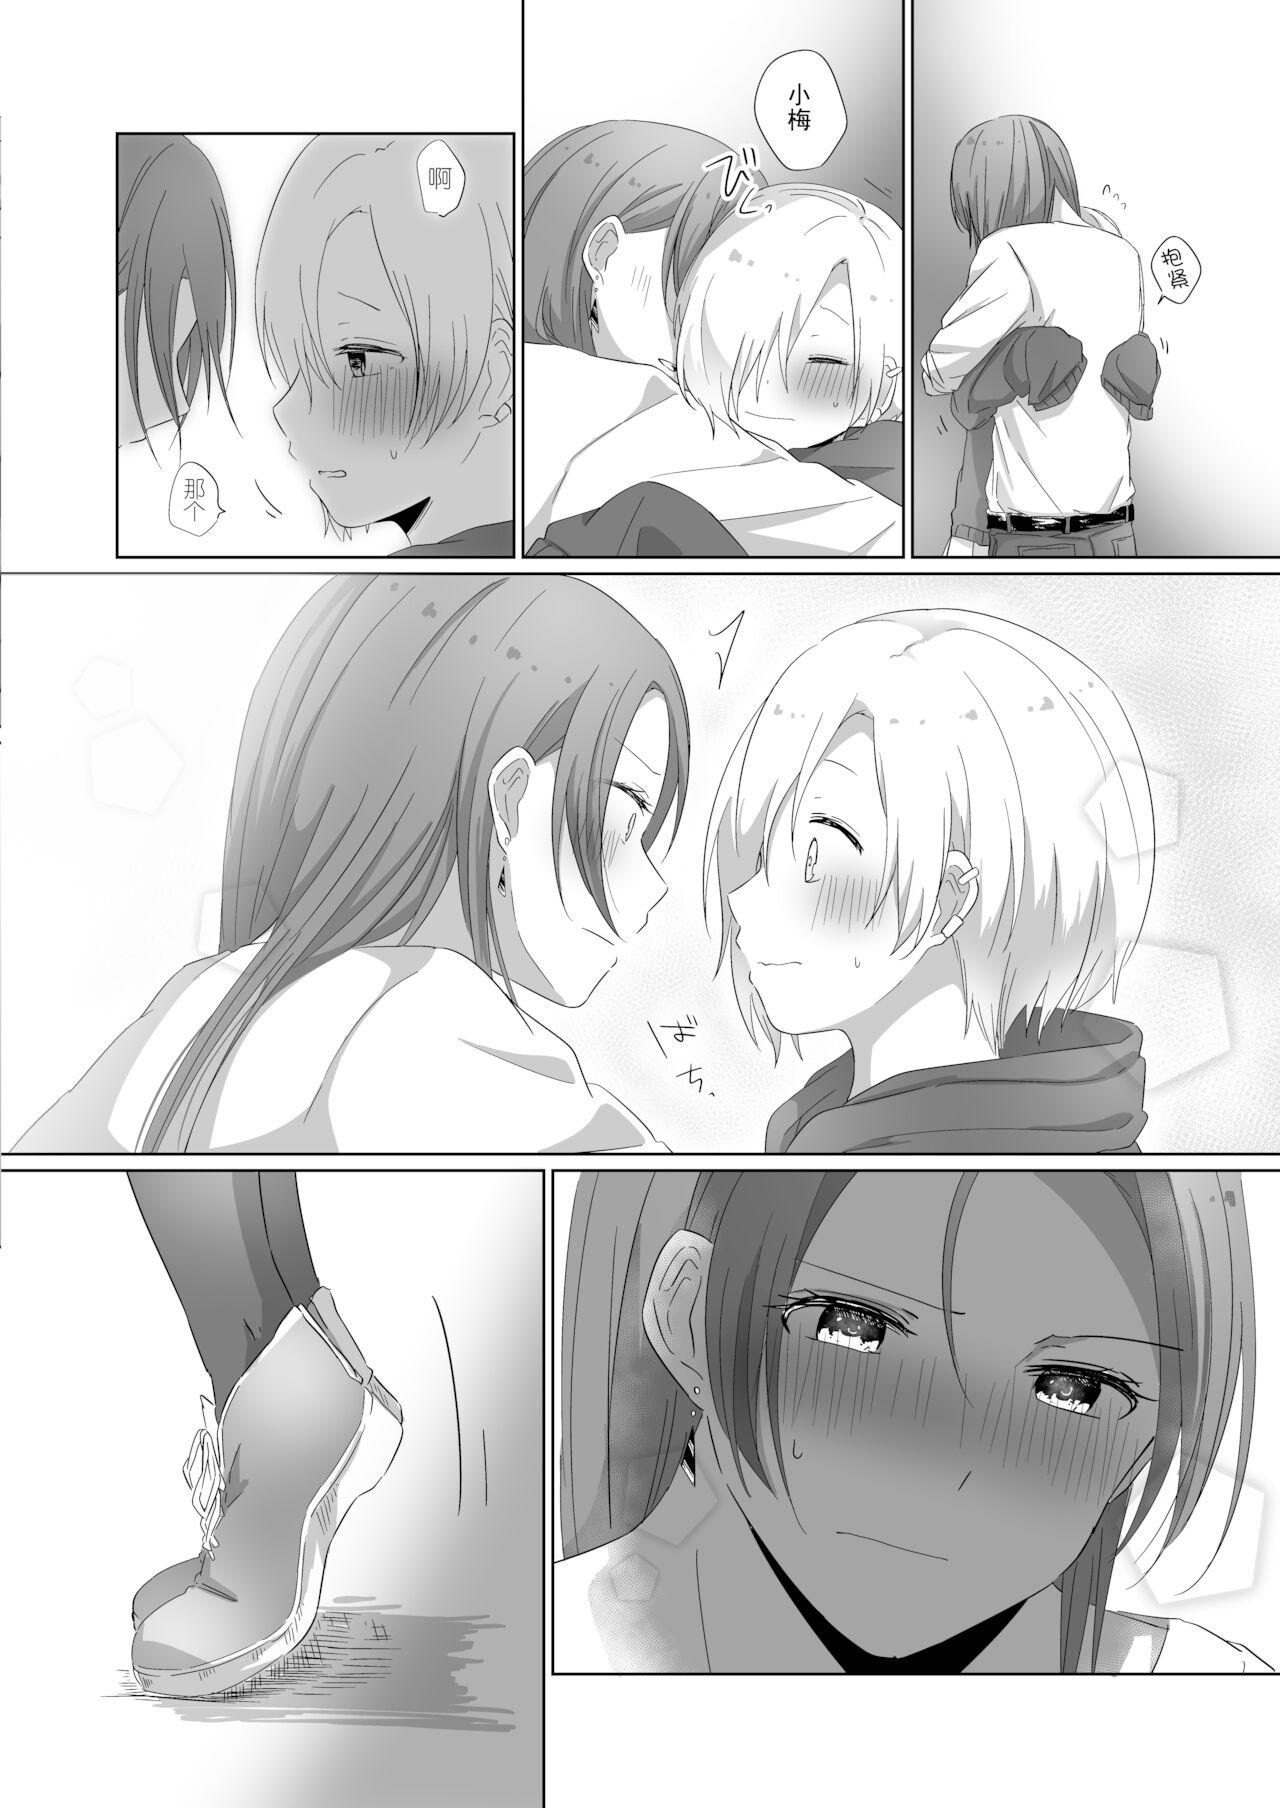 Little Your warmth - The idolmaster Ladyboy - Page 9